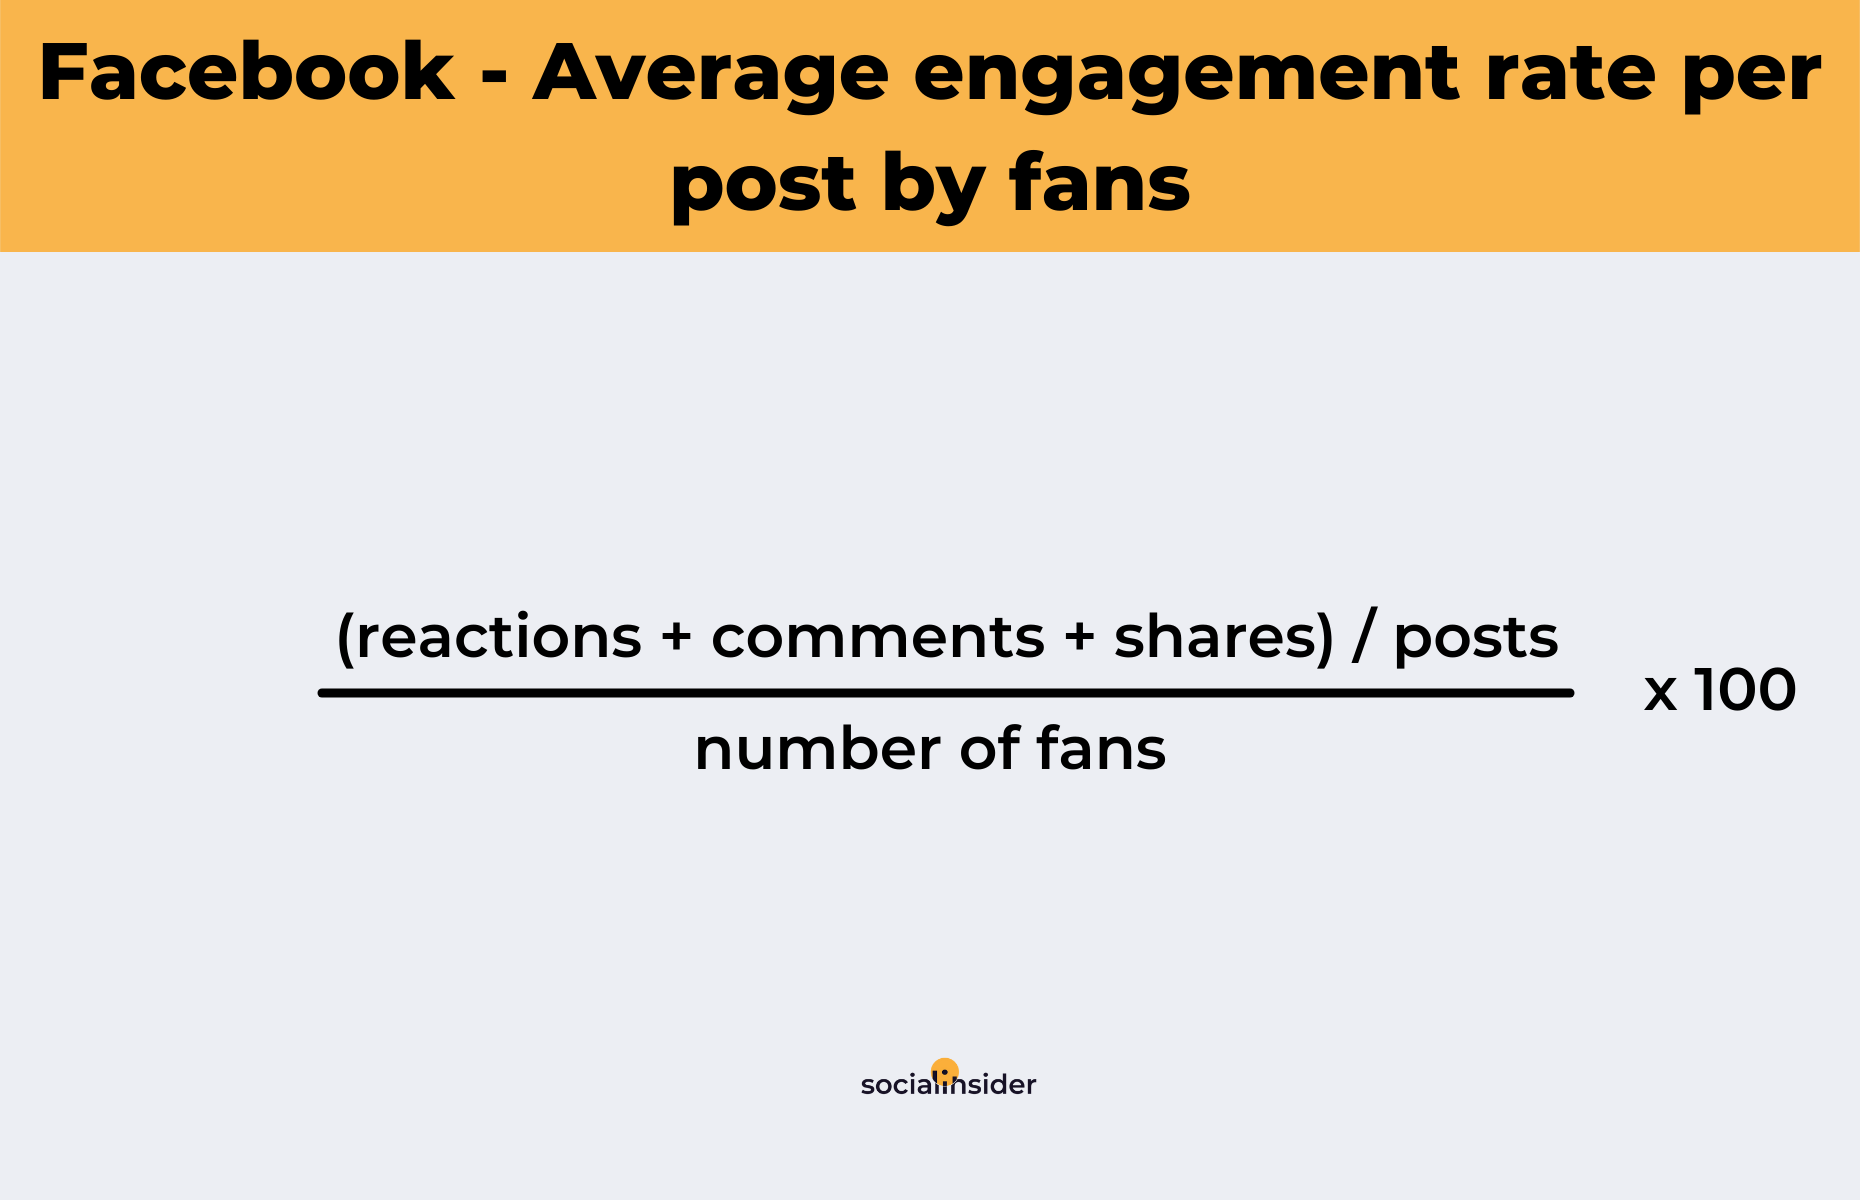 How to calculate the average engagement rate per post by fans on Facebook